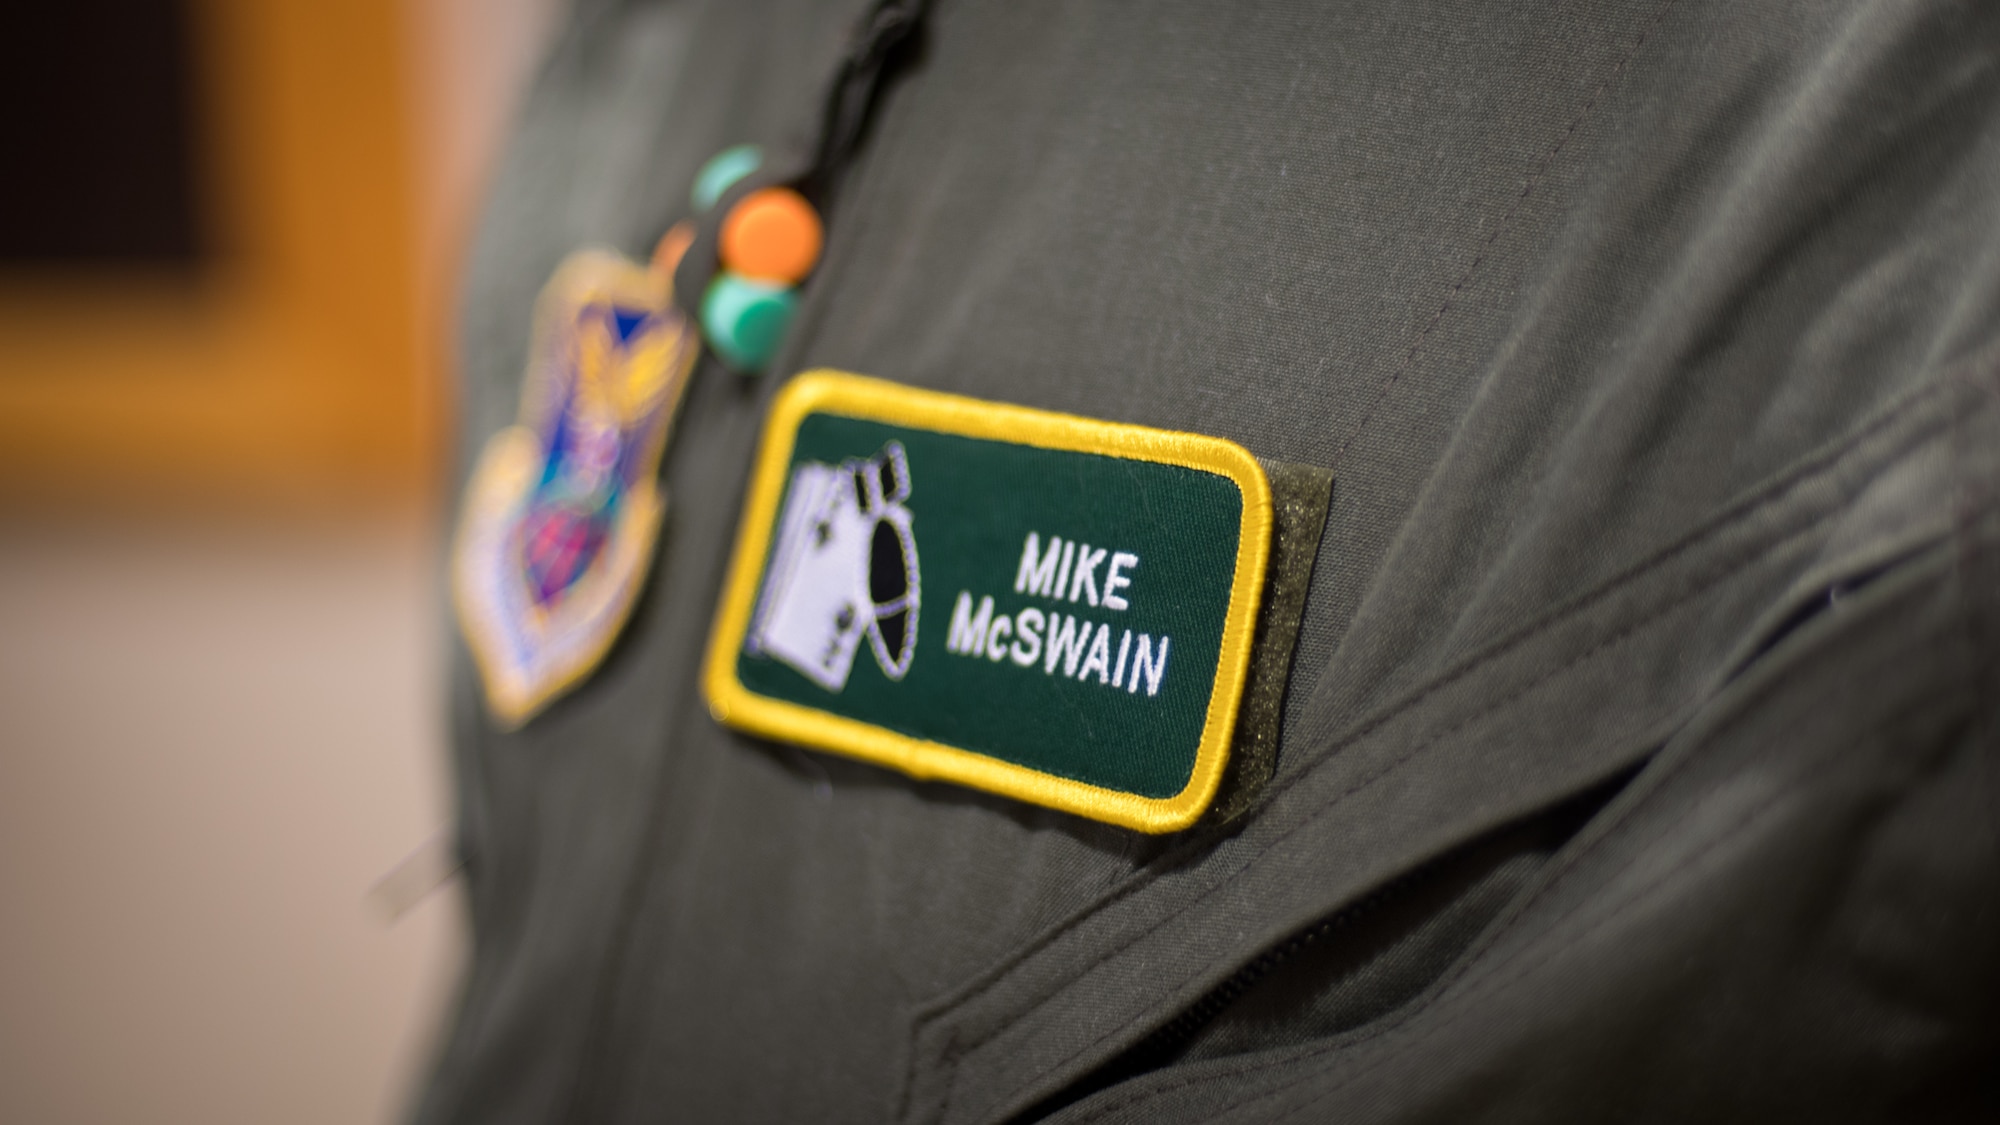 Mike McSwain, 2nd Operations Group honorary commander, displays his name patch before an honorary commander’s unit orientation flight at Barksdale Air Force Base, La., June 20, 2018. McSwain was appointed as the honorary commander to the 2nd OG in April 2018.